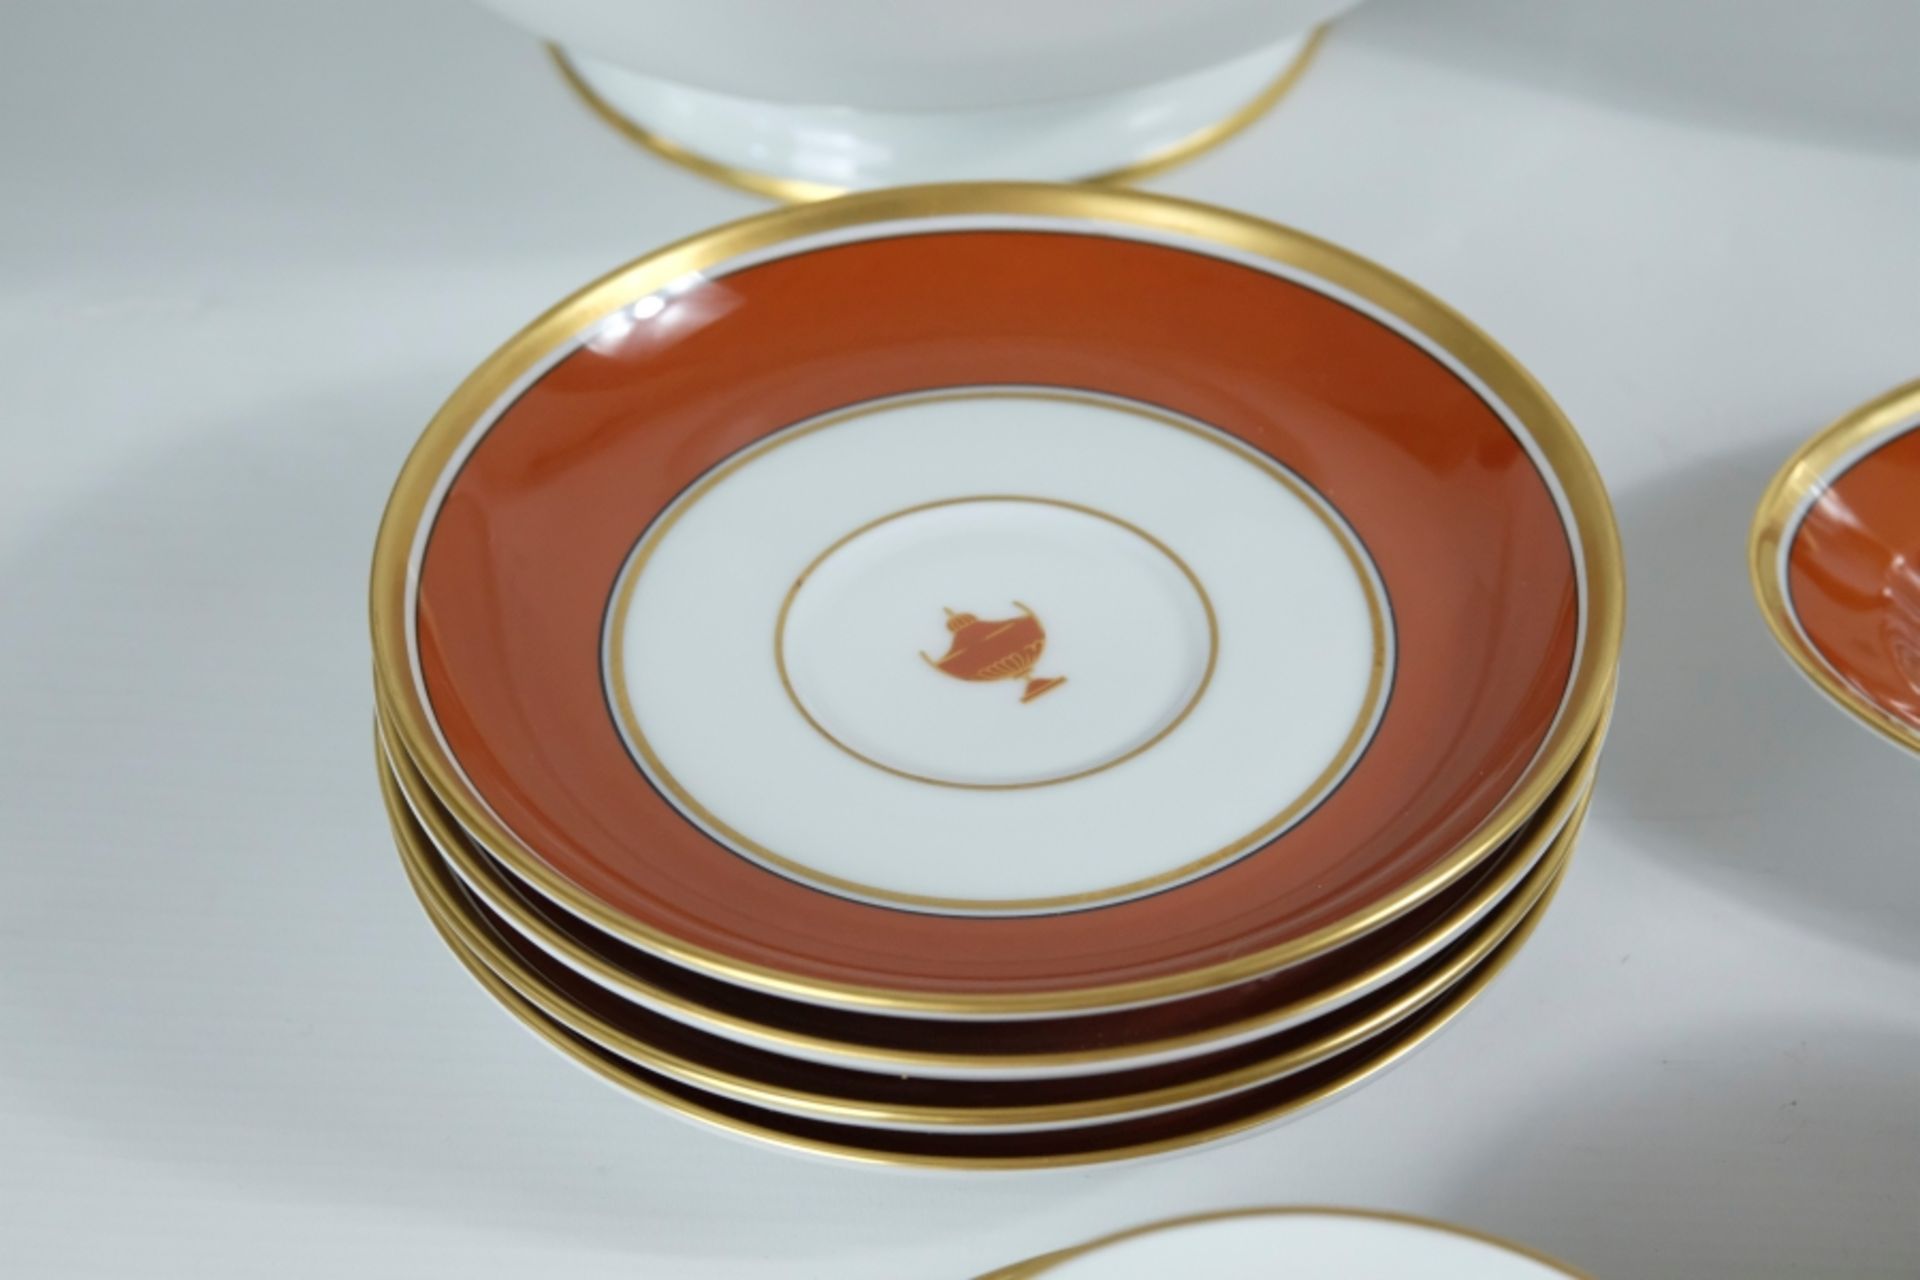 Richard Ginori "Contessa" dinner service, porcelain, white and terracotta with gold rim, consisting - Image 2 of 8